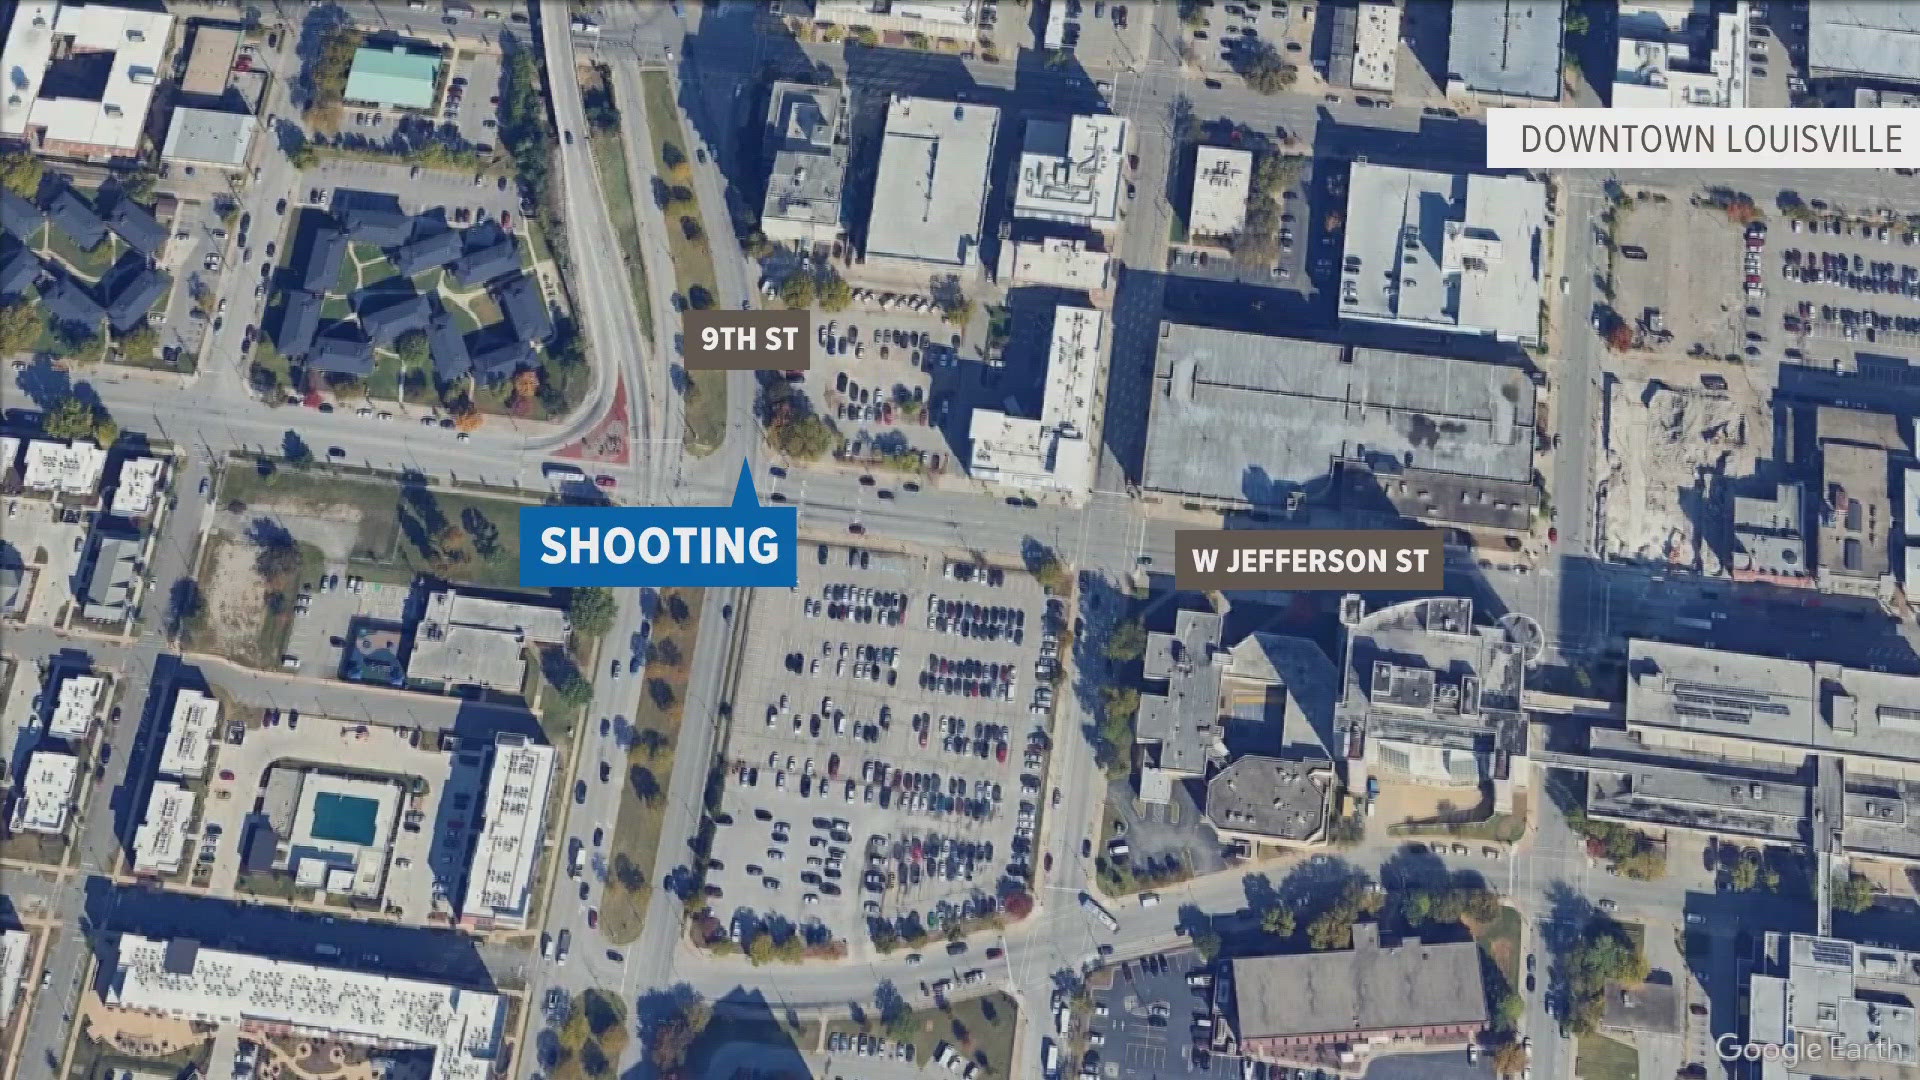 Officers found a teenage boy in a parking lot suffering from a gunshot wound Wednesday morning.